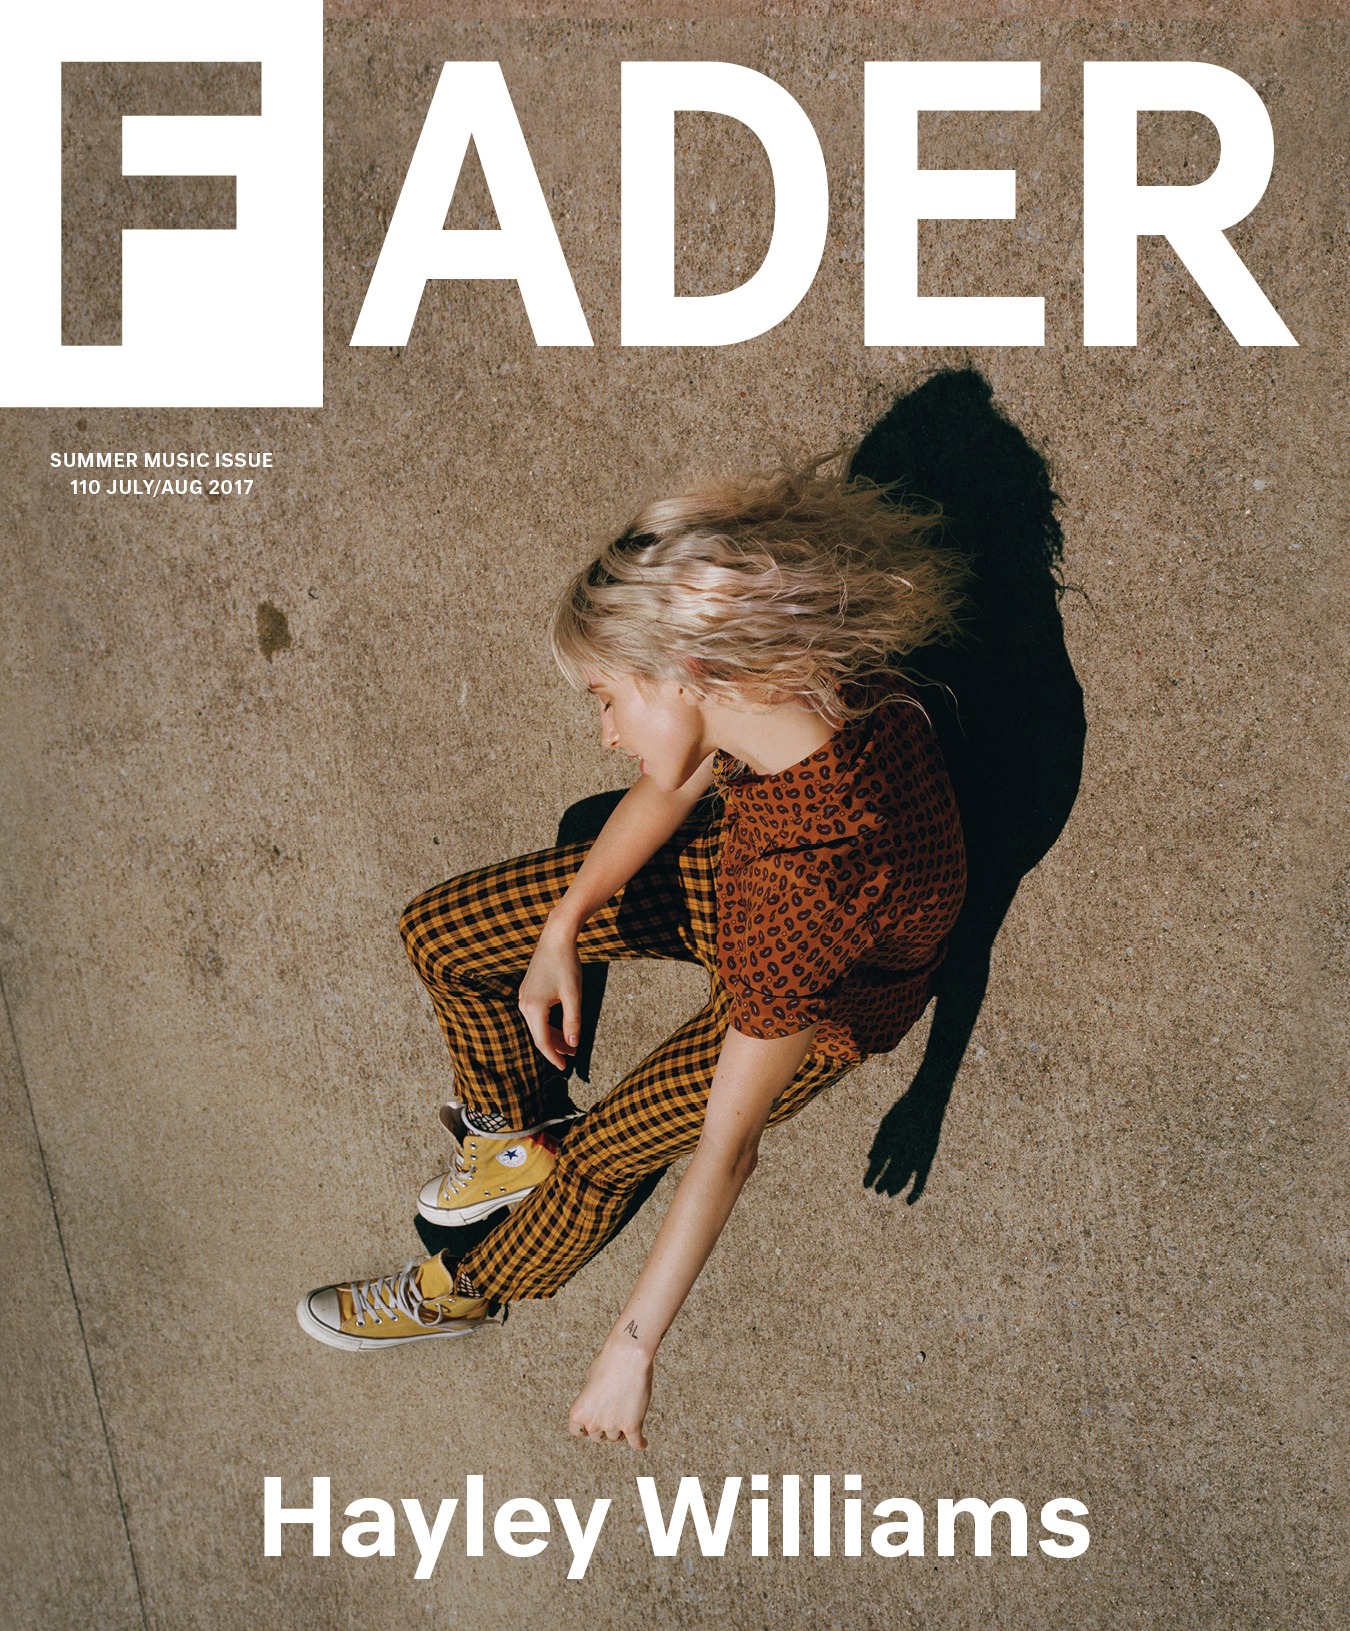 <a href="http://www.thefader.com/2017/06/29/paramore-hayley-williams-cover-story-interview​​​​​​​" target="_Blank">THE FADER</a>